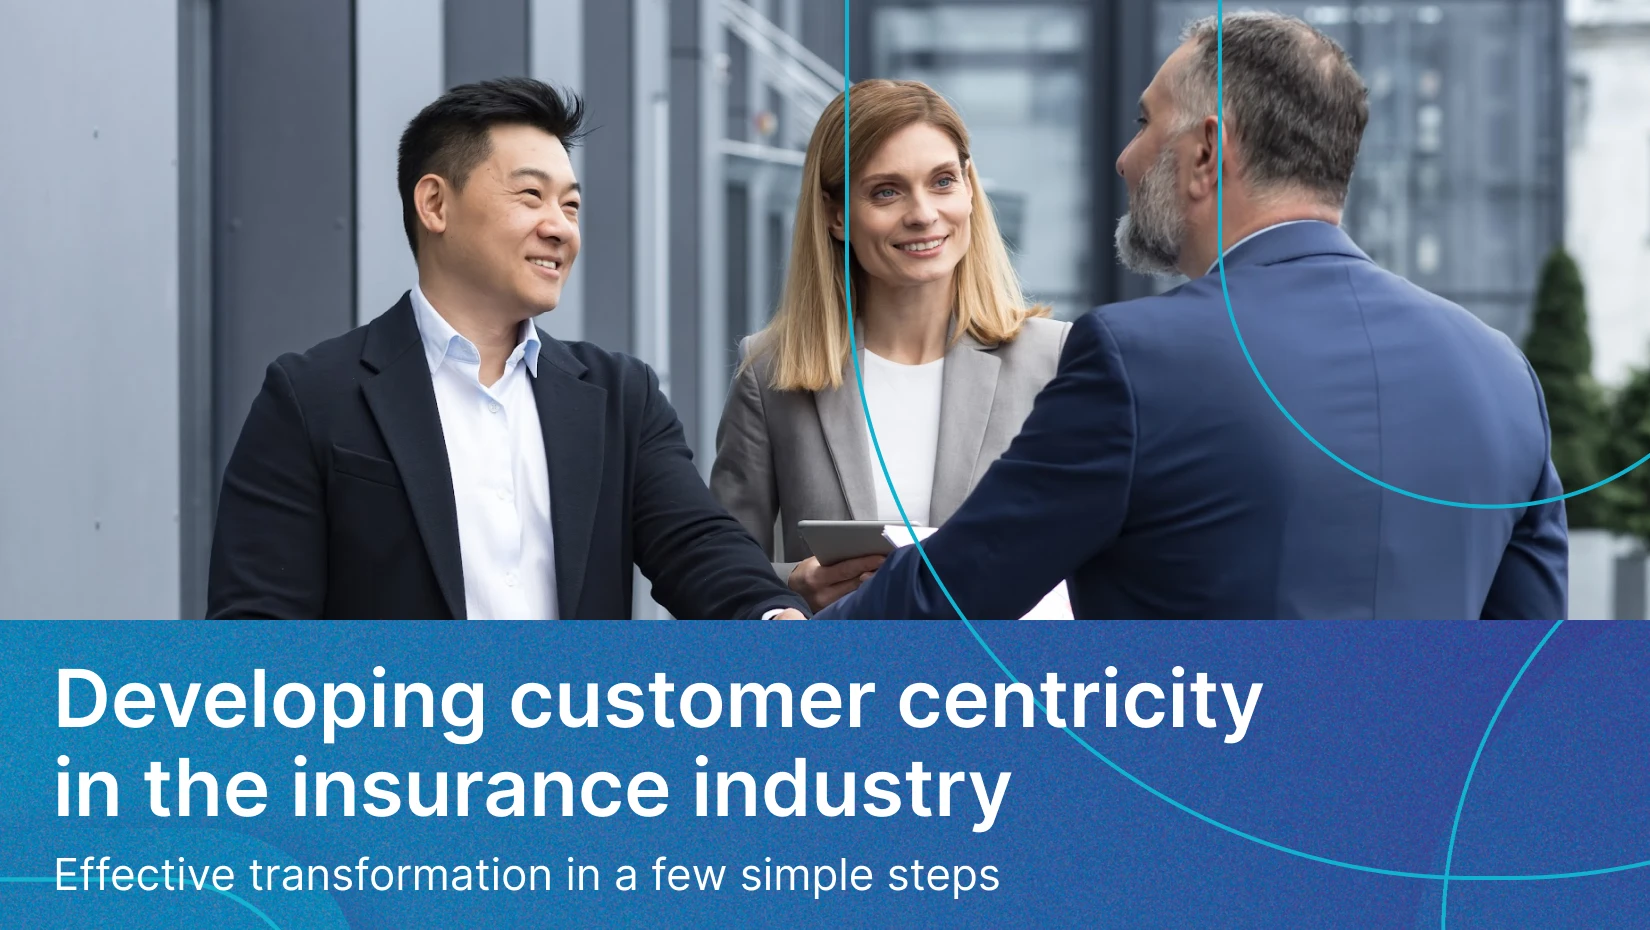 Developing customer centricity in the insurance industry – effective transformation in a few simple steps